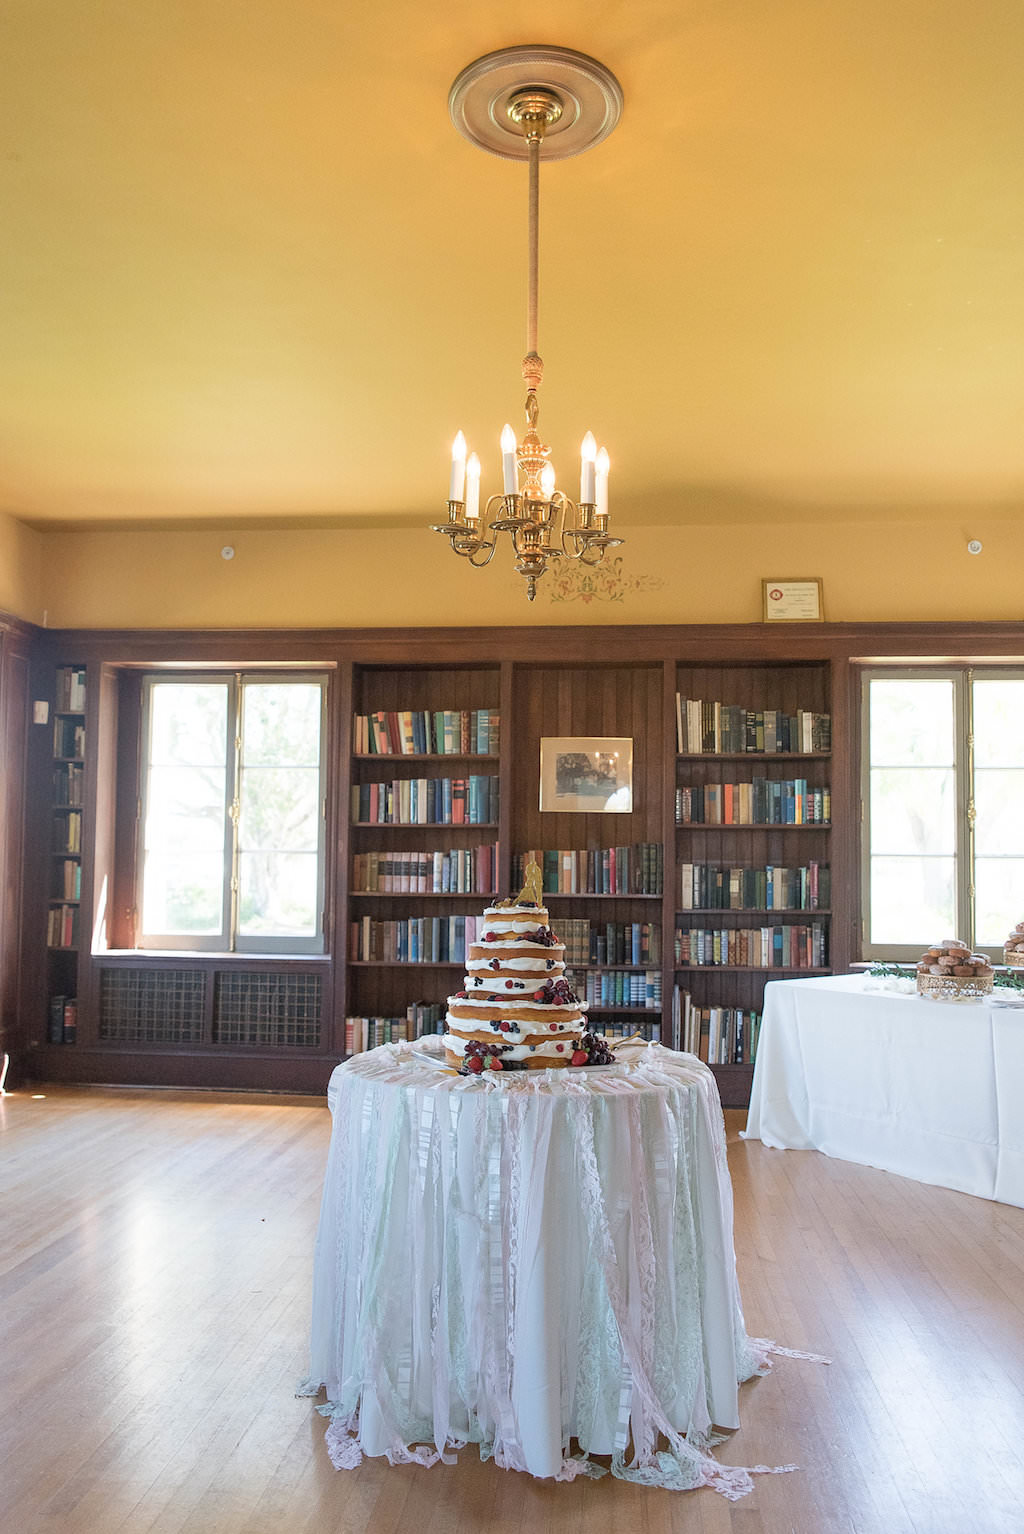 Indoor Historic Library Brunch Wedding Reception Naked Cake with Berries | Sarasota Wedding Venue The Edson Keith Mansion